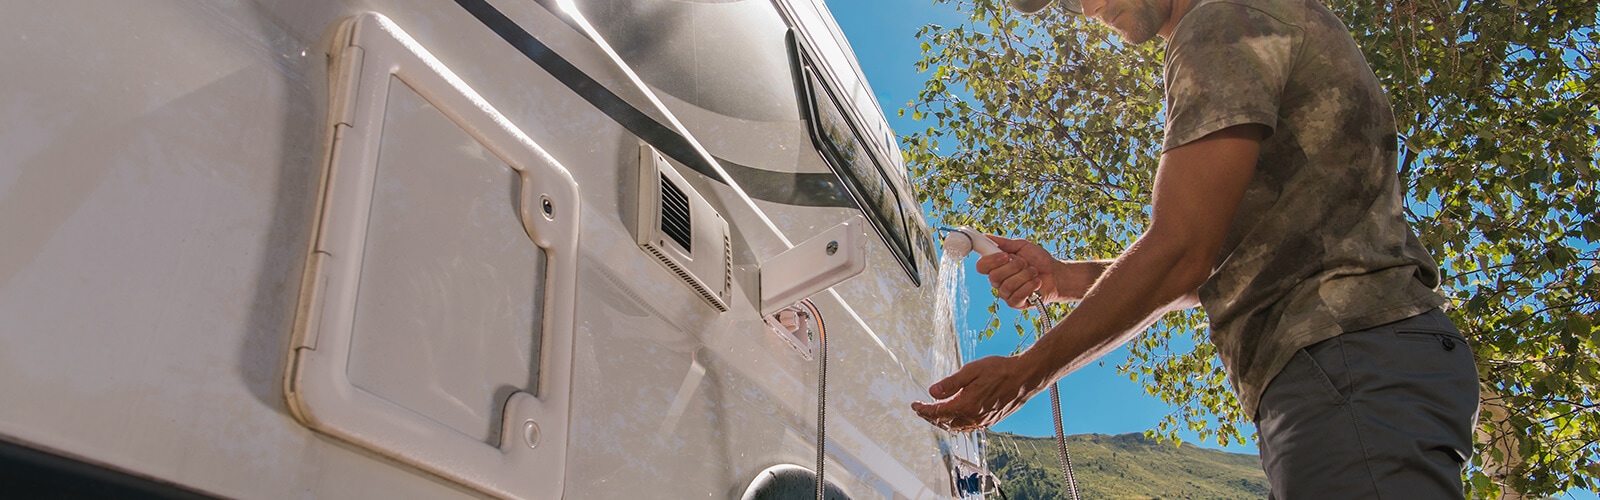 8 More Easy Tips For The RV Lifestyle